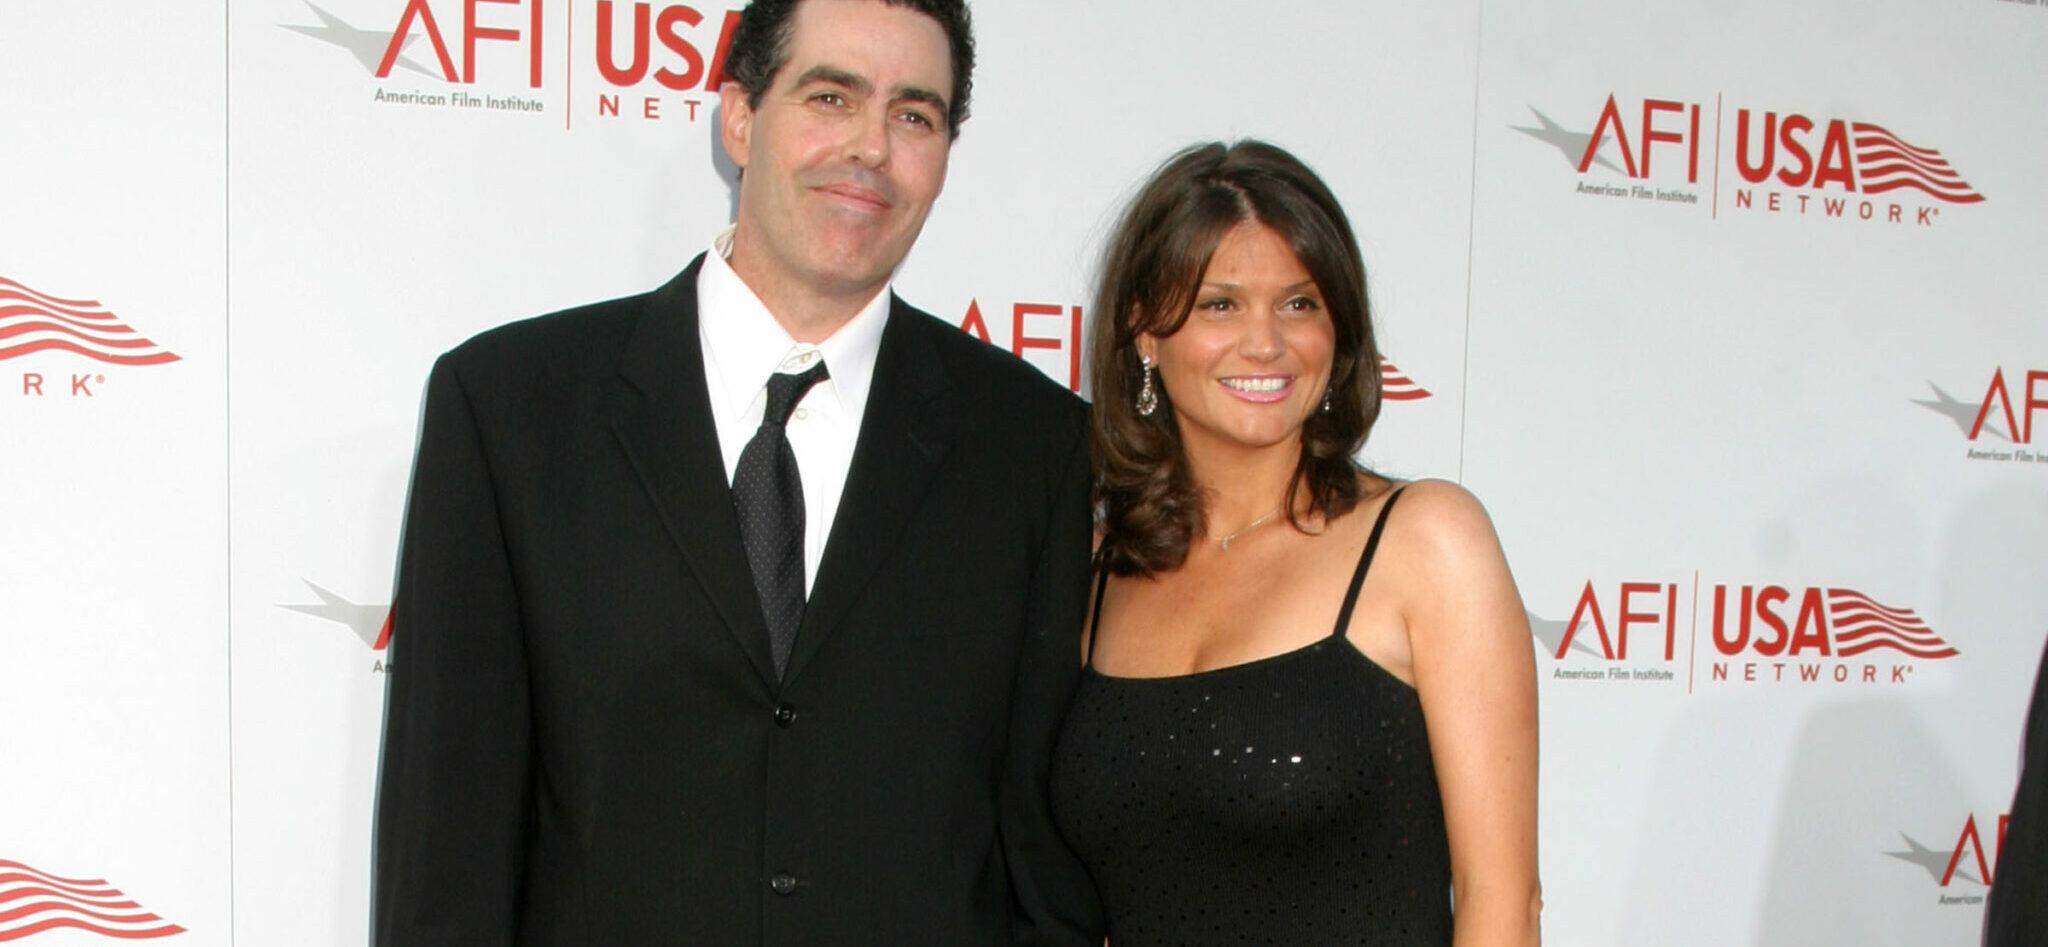 Adam Carolla’s Ex-Wife Responds To Divorce: I Want Joint Custody Of Our Kids